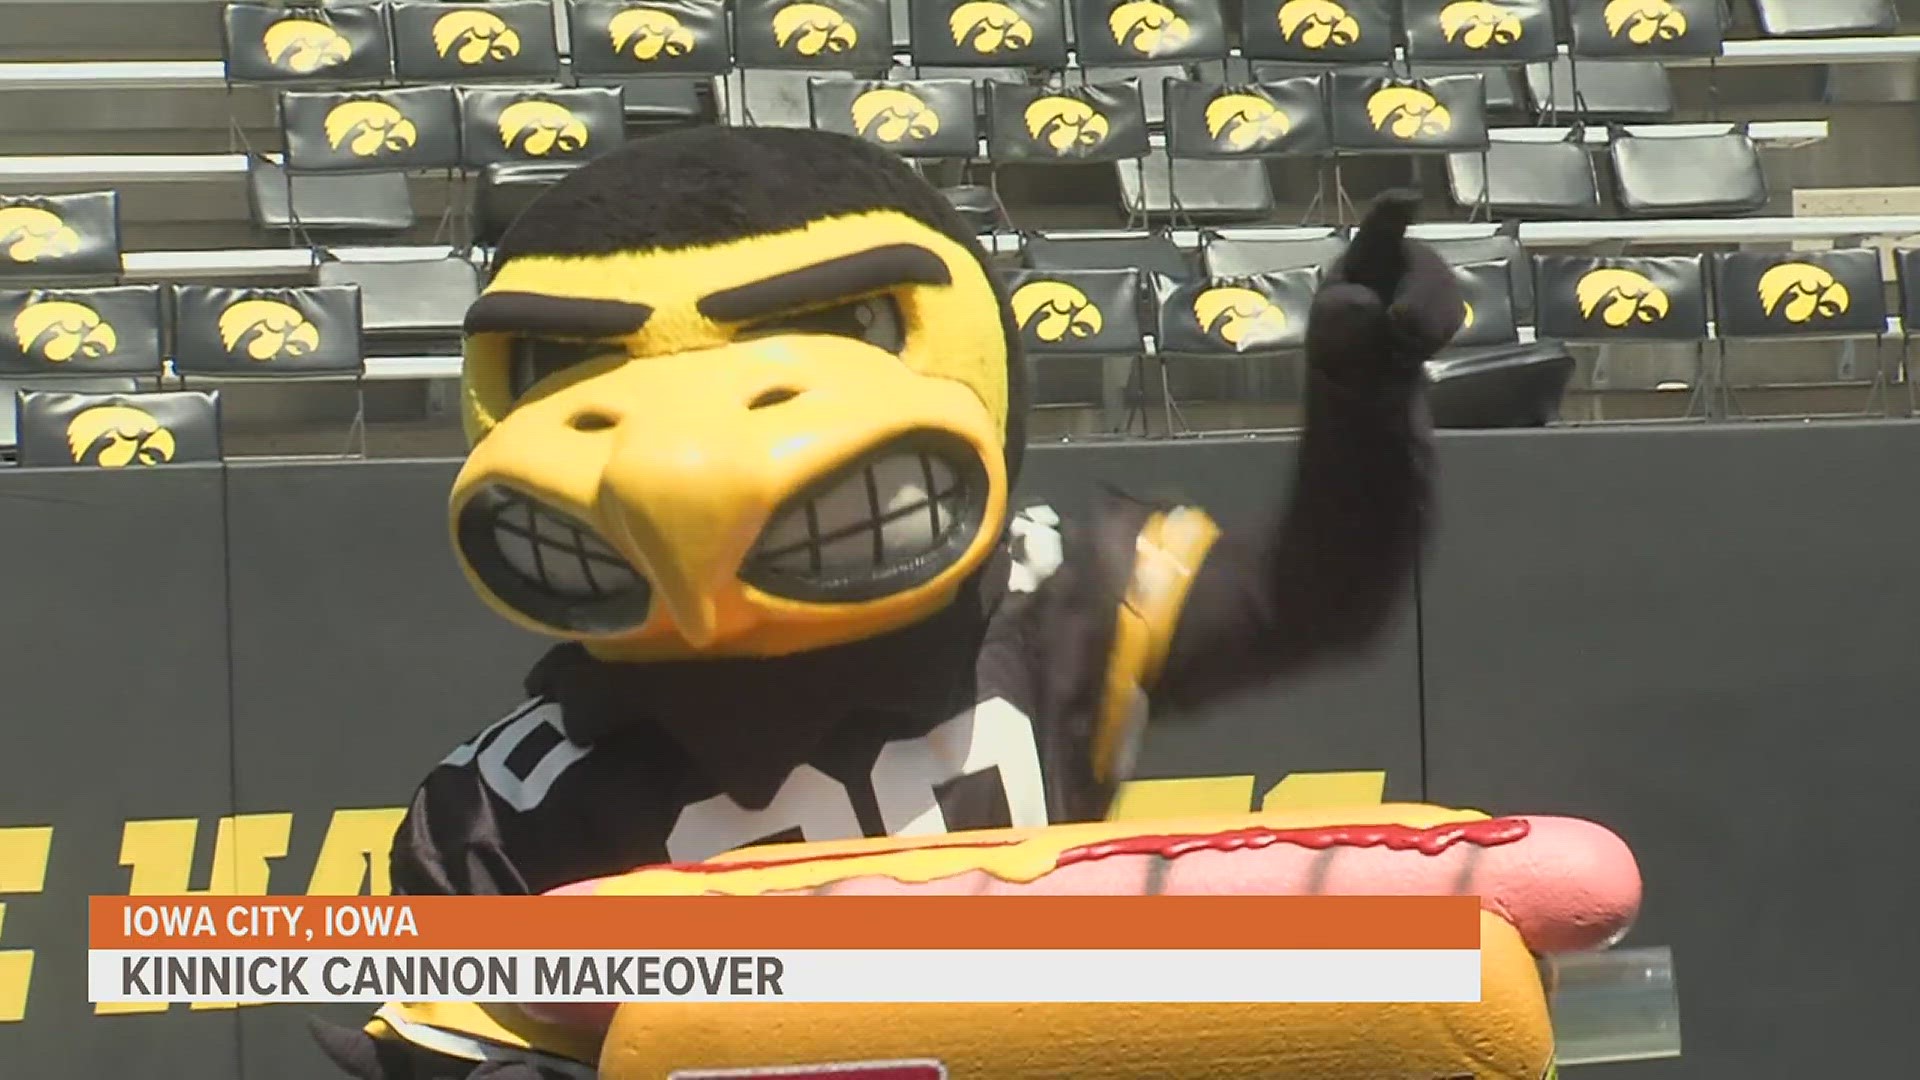 Introducing Kinnick Stadium's new hot dog cannon, fans can now catch up with the game, while also getting some snacks.